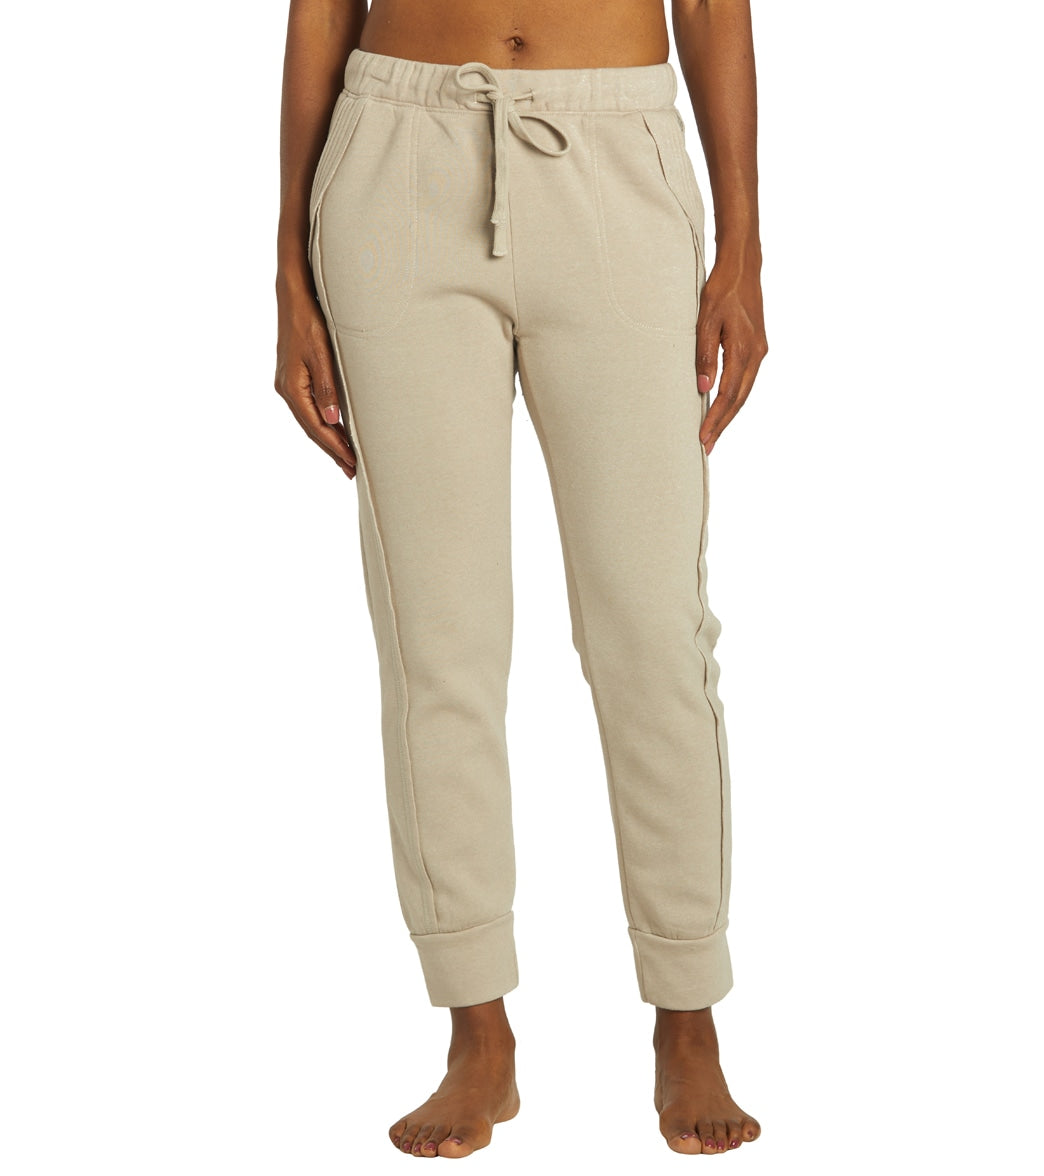 Free People Work It Out Joggers at YogaOutlet.com - Free Shipping